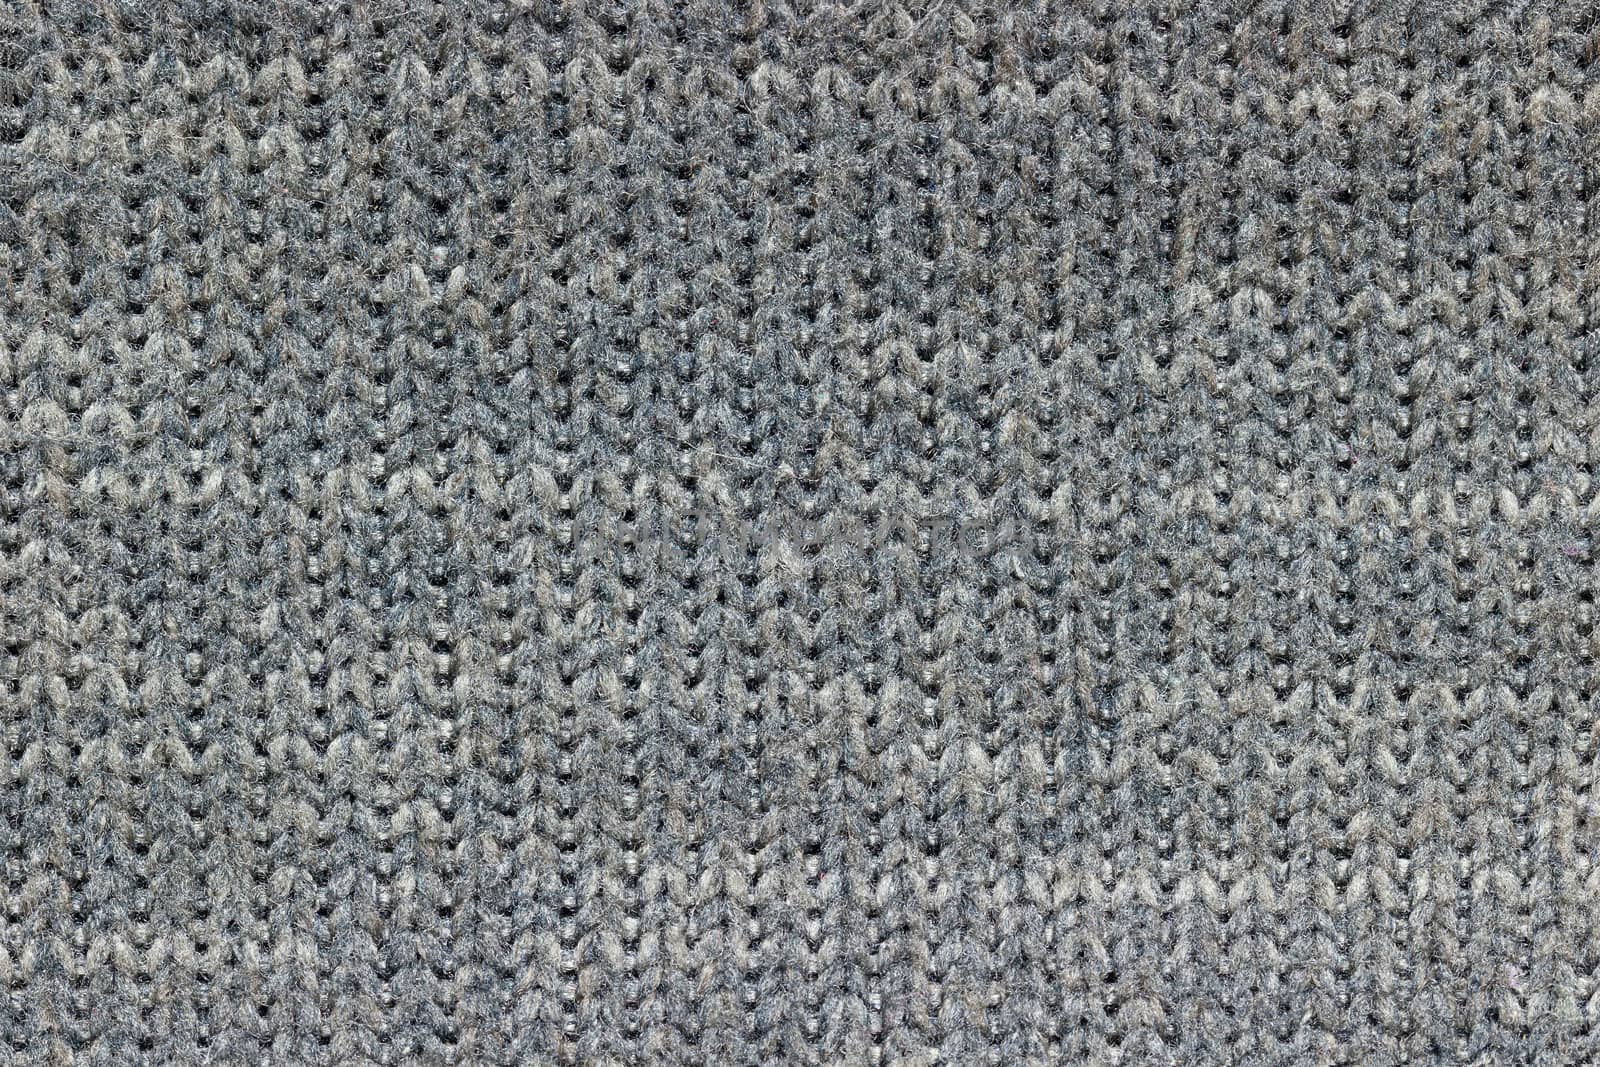 Texture of gray jacket fabric. Concept of clothes or fashion.